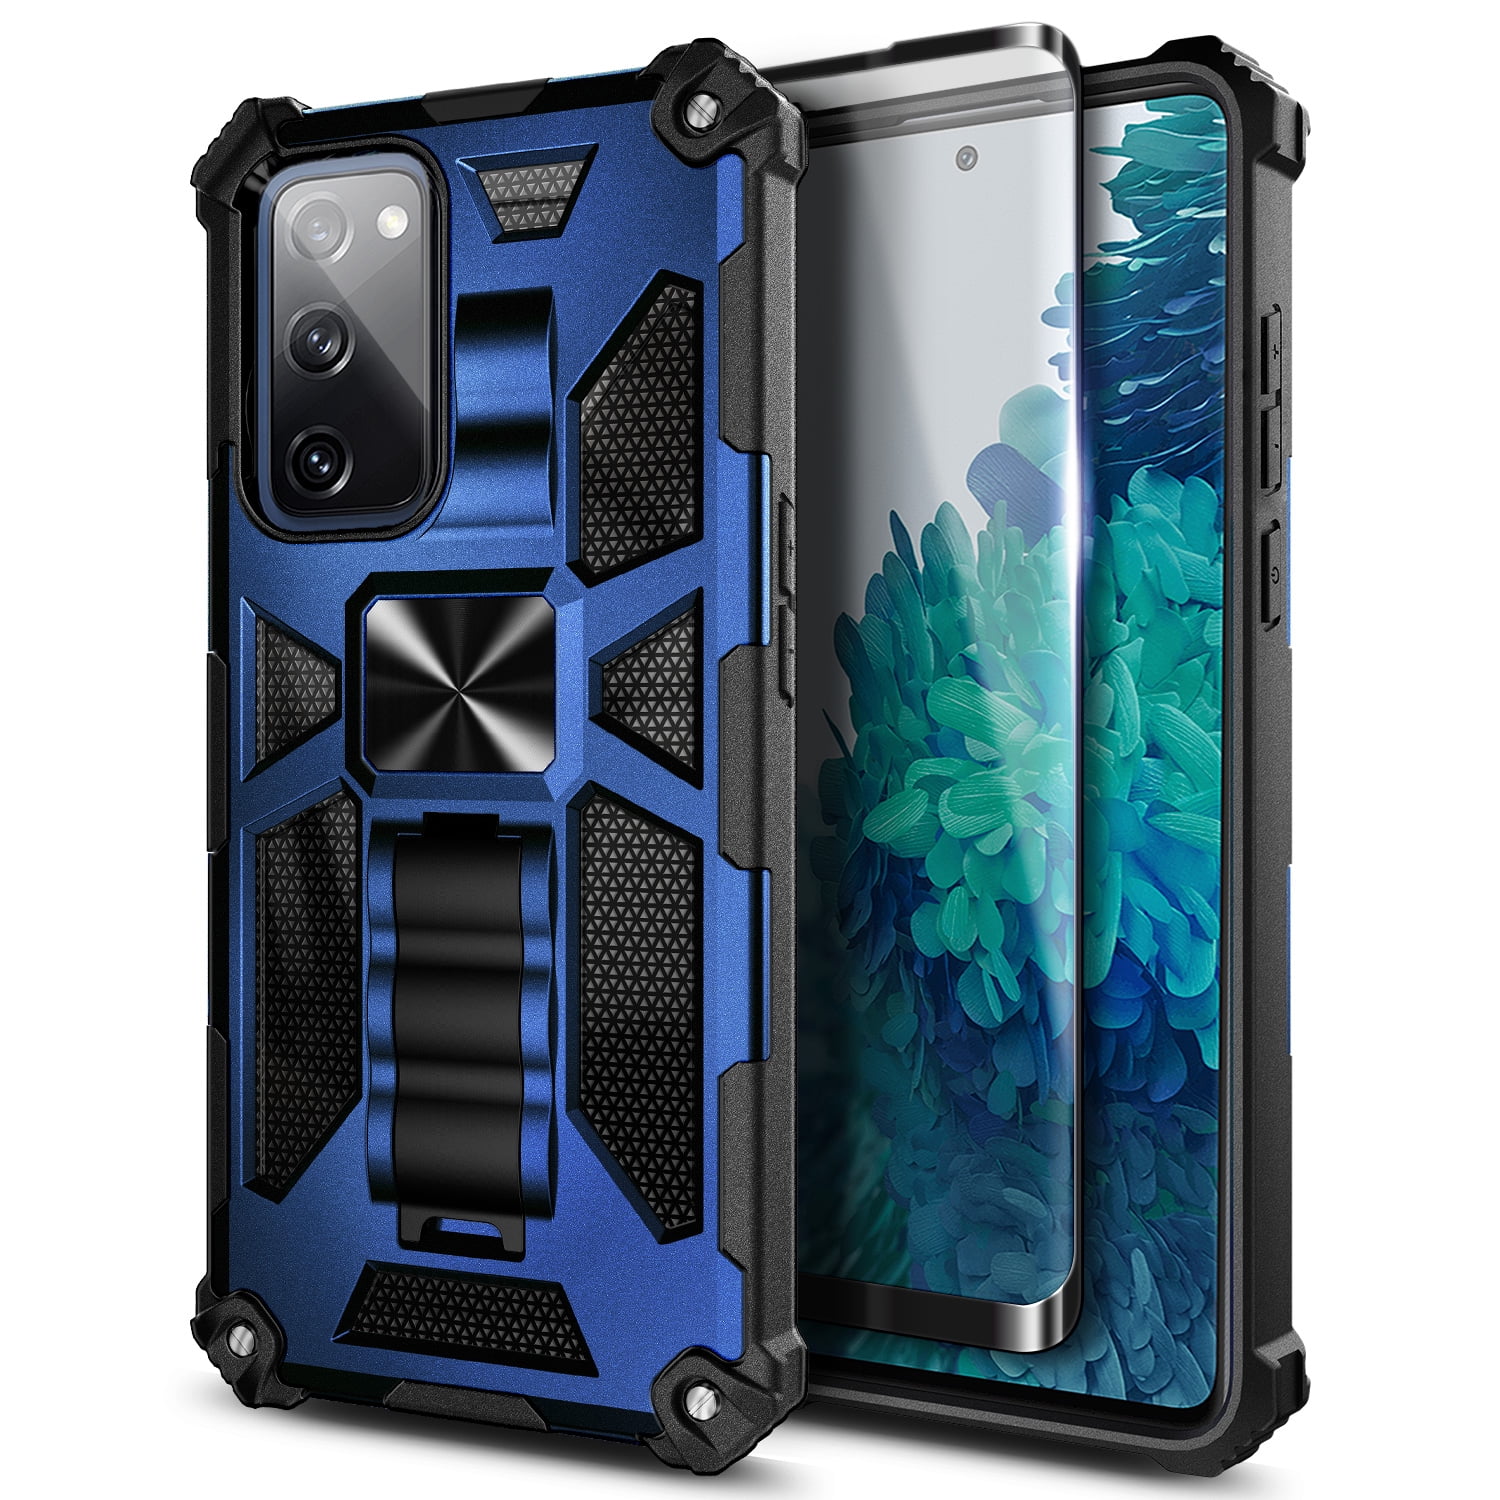 MGSBCXN Armor Case for Samsung Galaxy S20 FE 5G, Military Grade Shockproof  Protection Samsung Galaxy S20 FE Case, Heavy Duty Protection Slim Fit